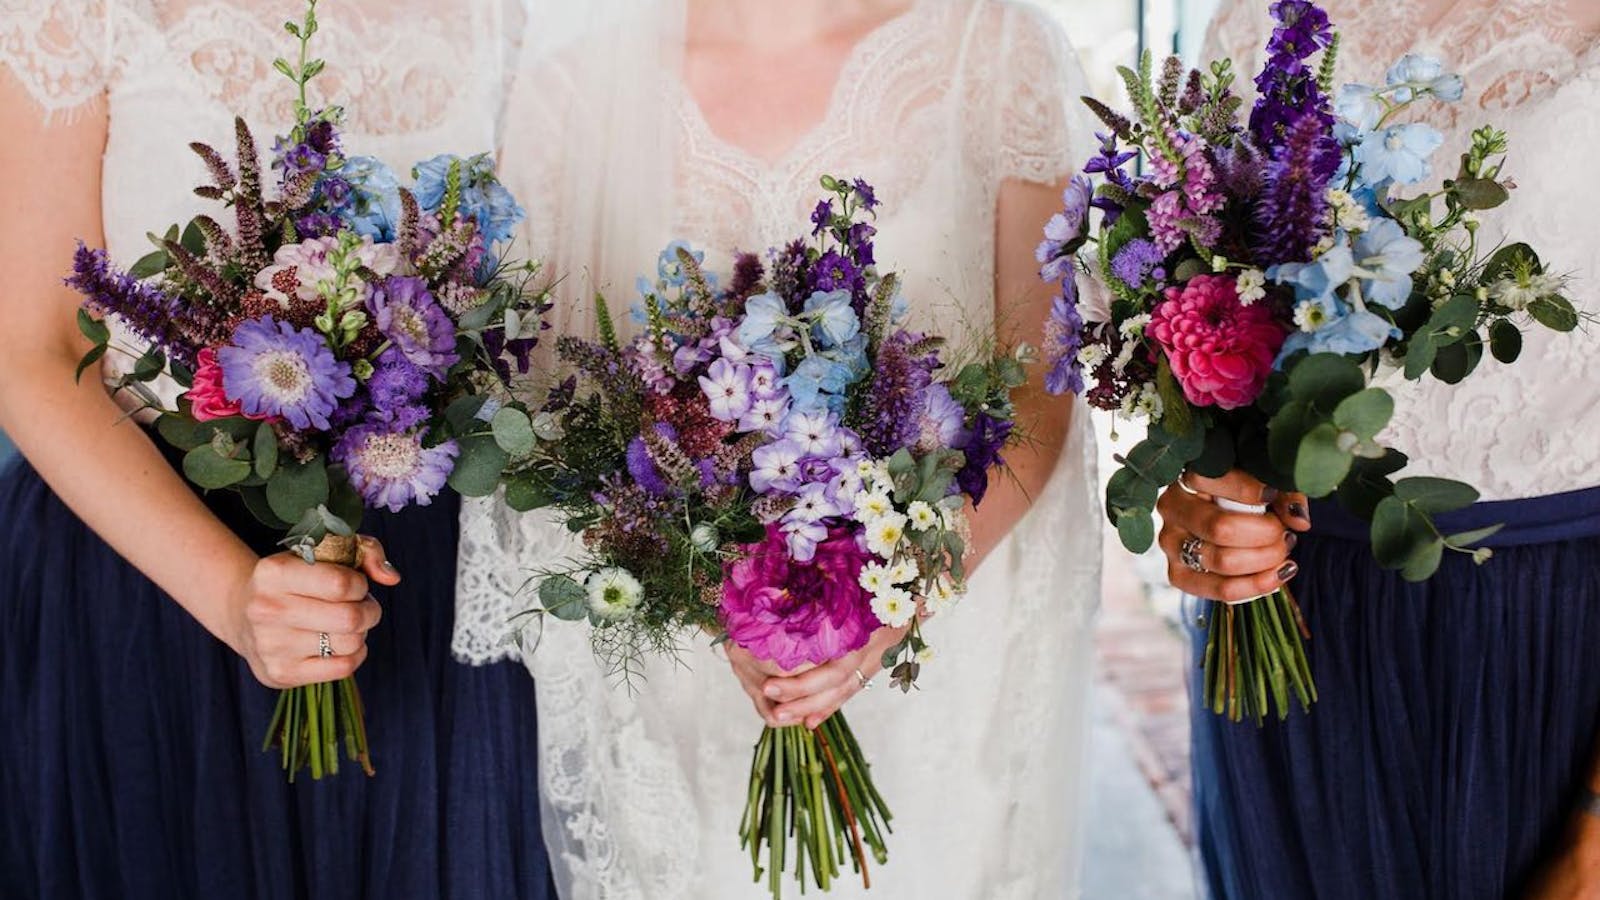 Natural and informal wedding bouquets